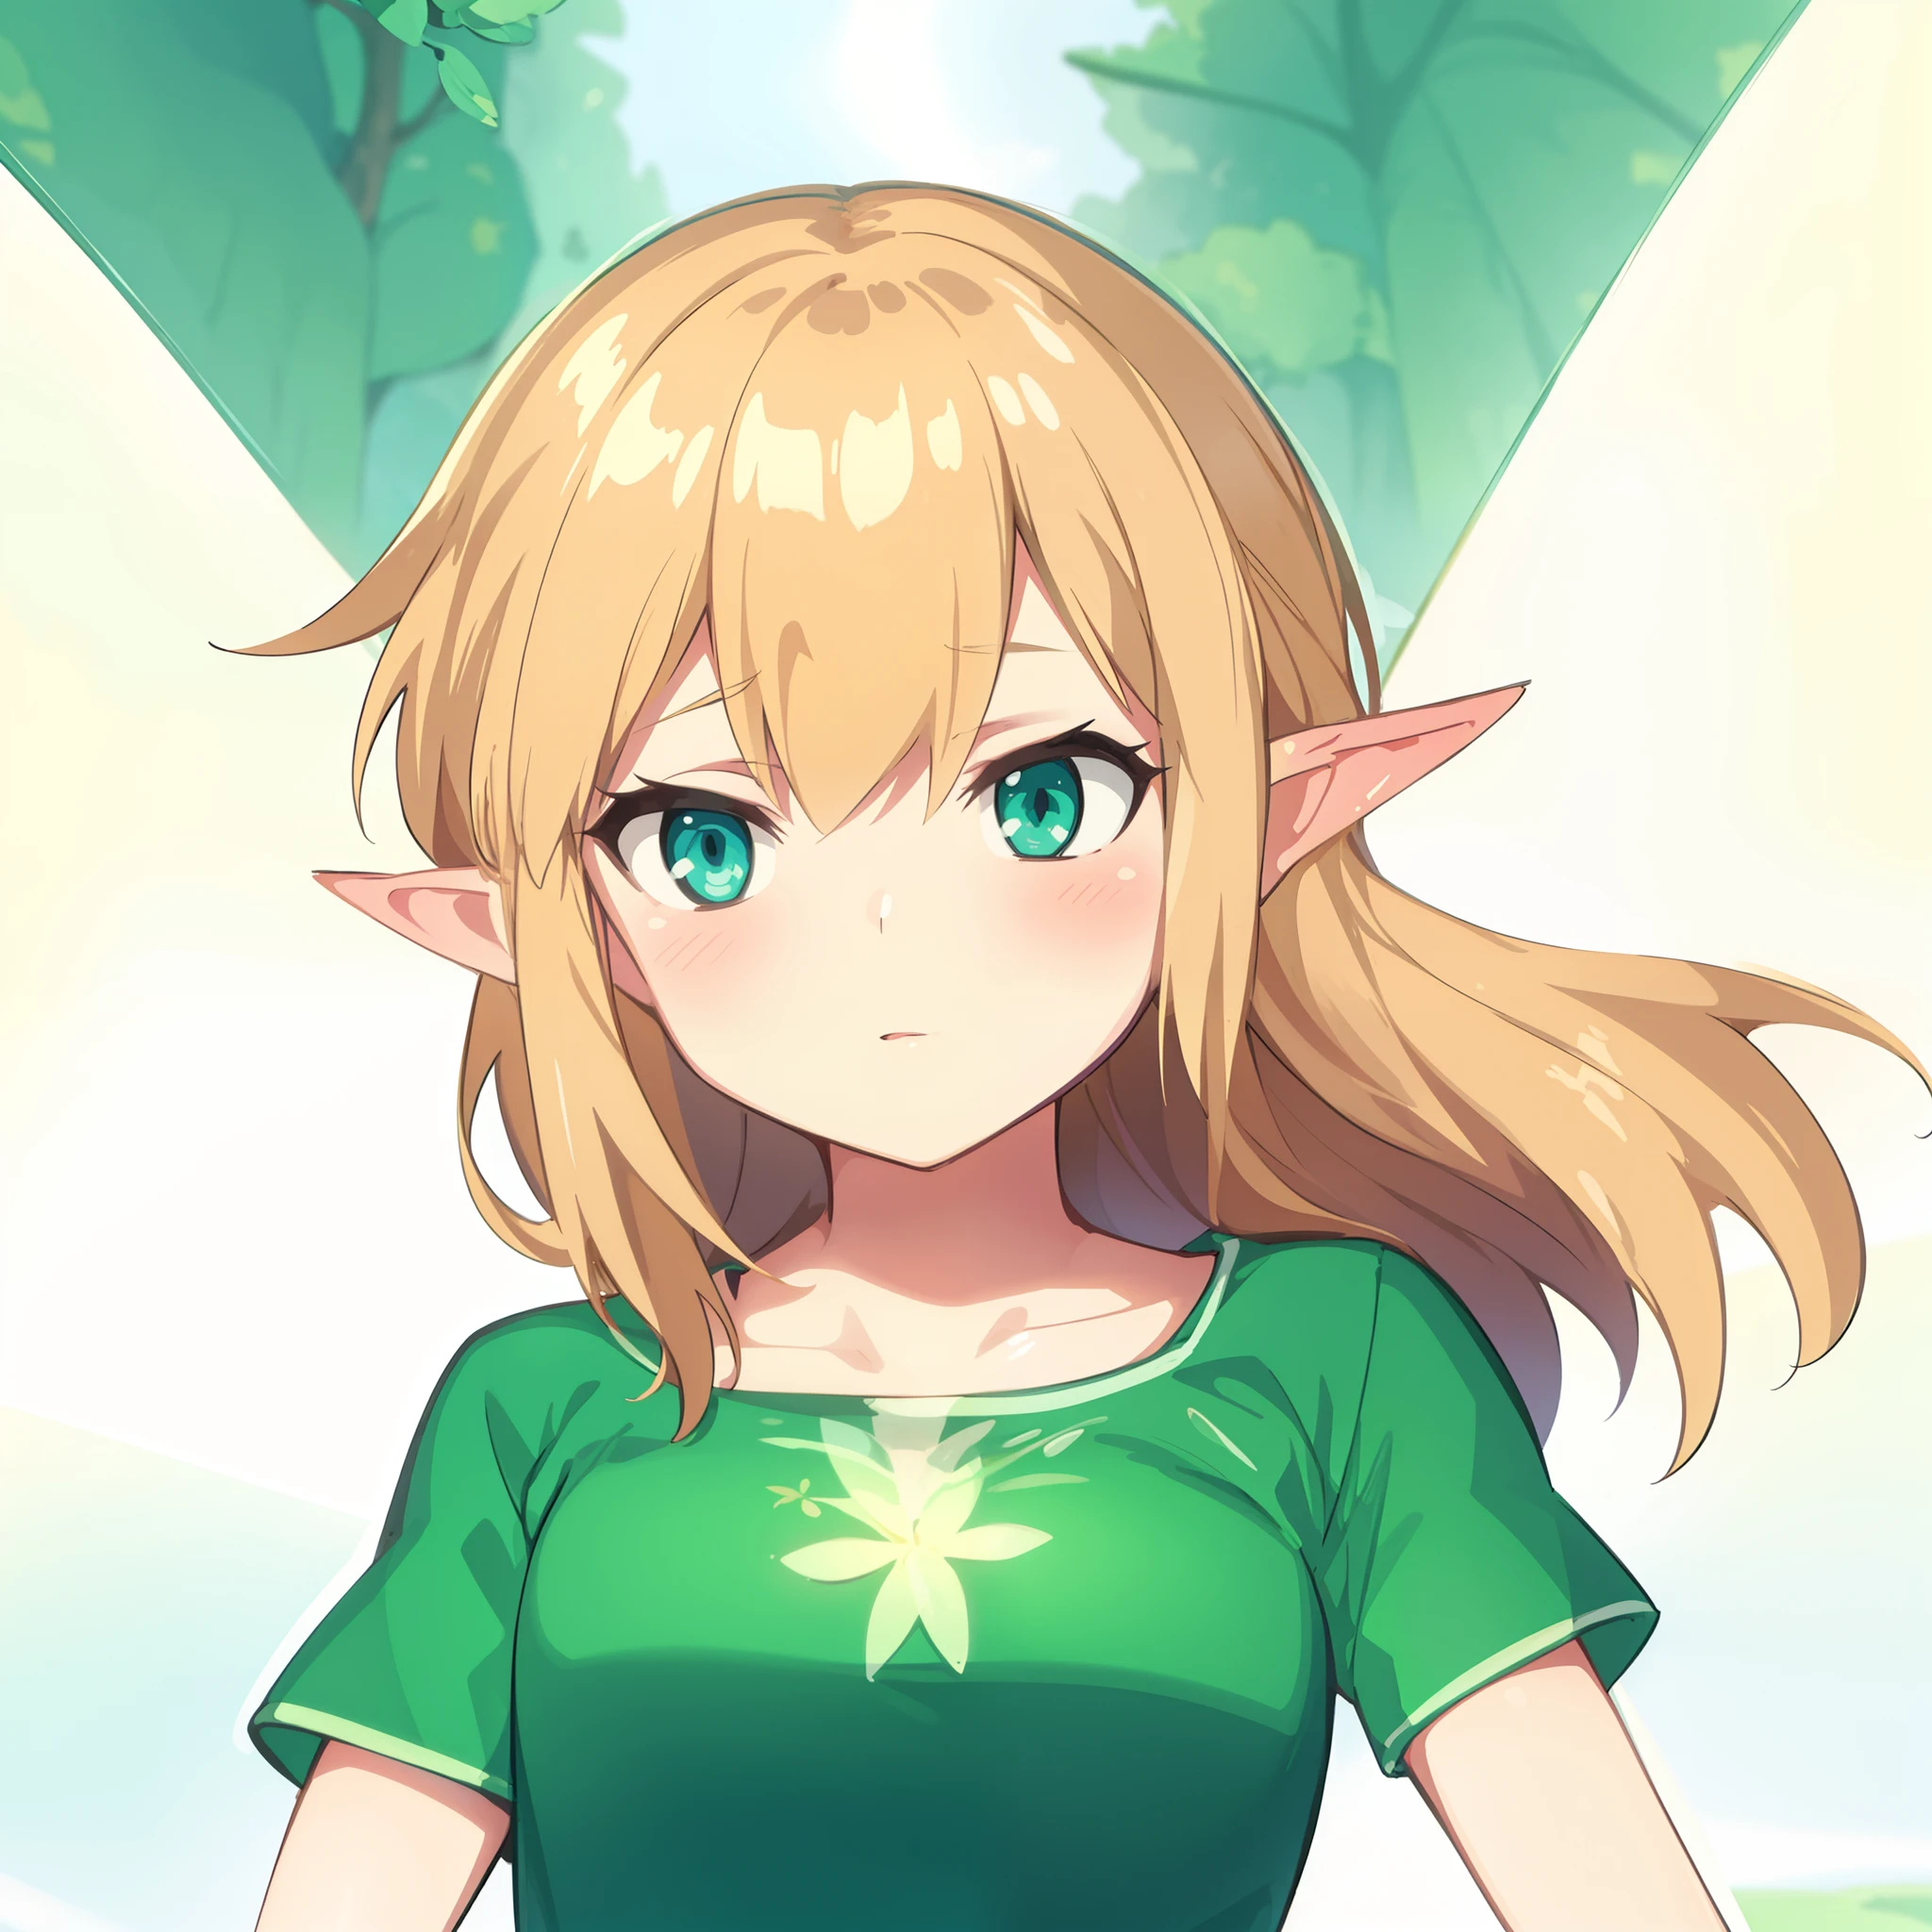 Fairy Girl.  white transparent wings. blonde woman. Cyan eyes. Playful face. green dress with knots. against the background of the forest and the sky